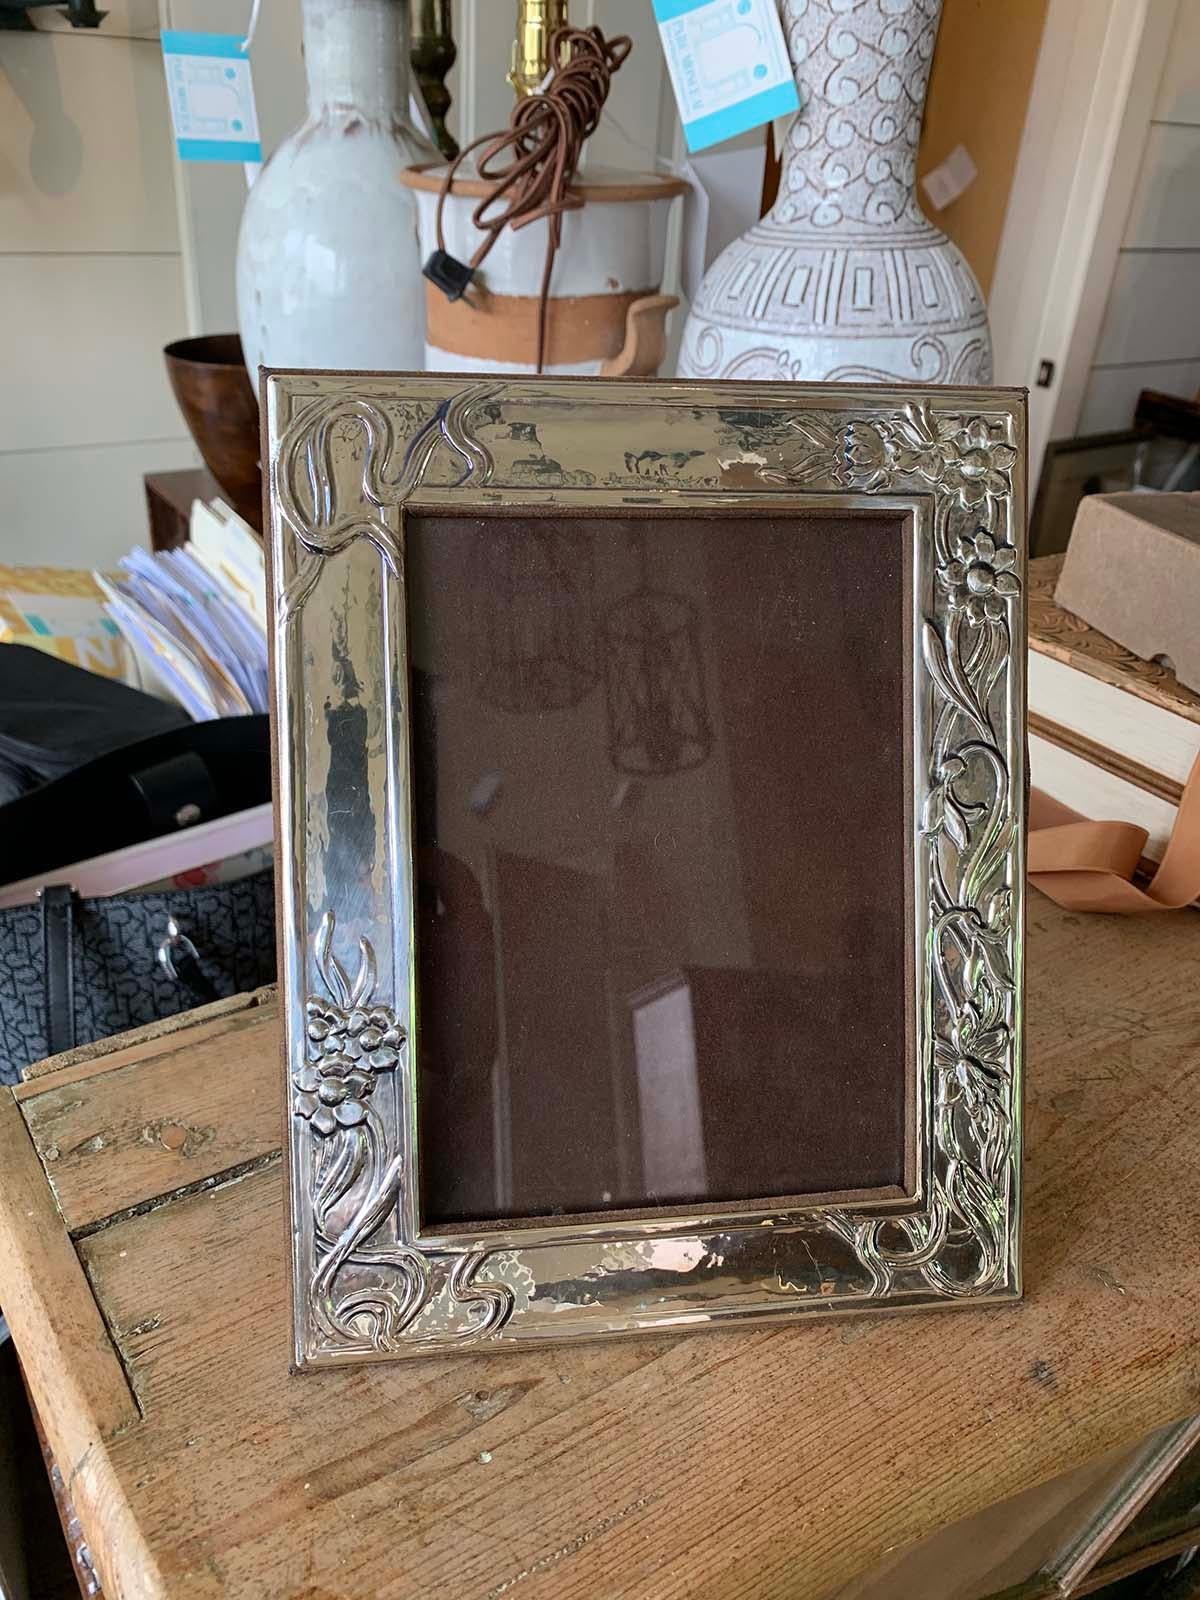 20th century silver 5.5 x 7.5 picture frame, possibly sterling
Overall dimensions: 7.75